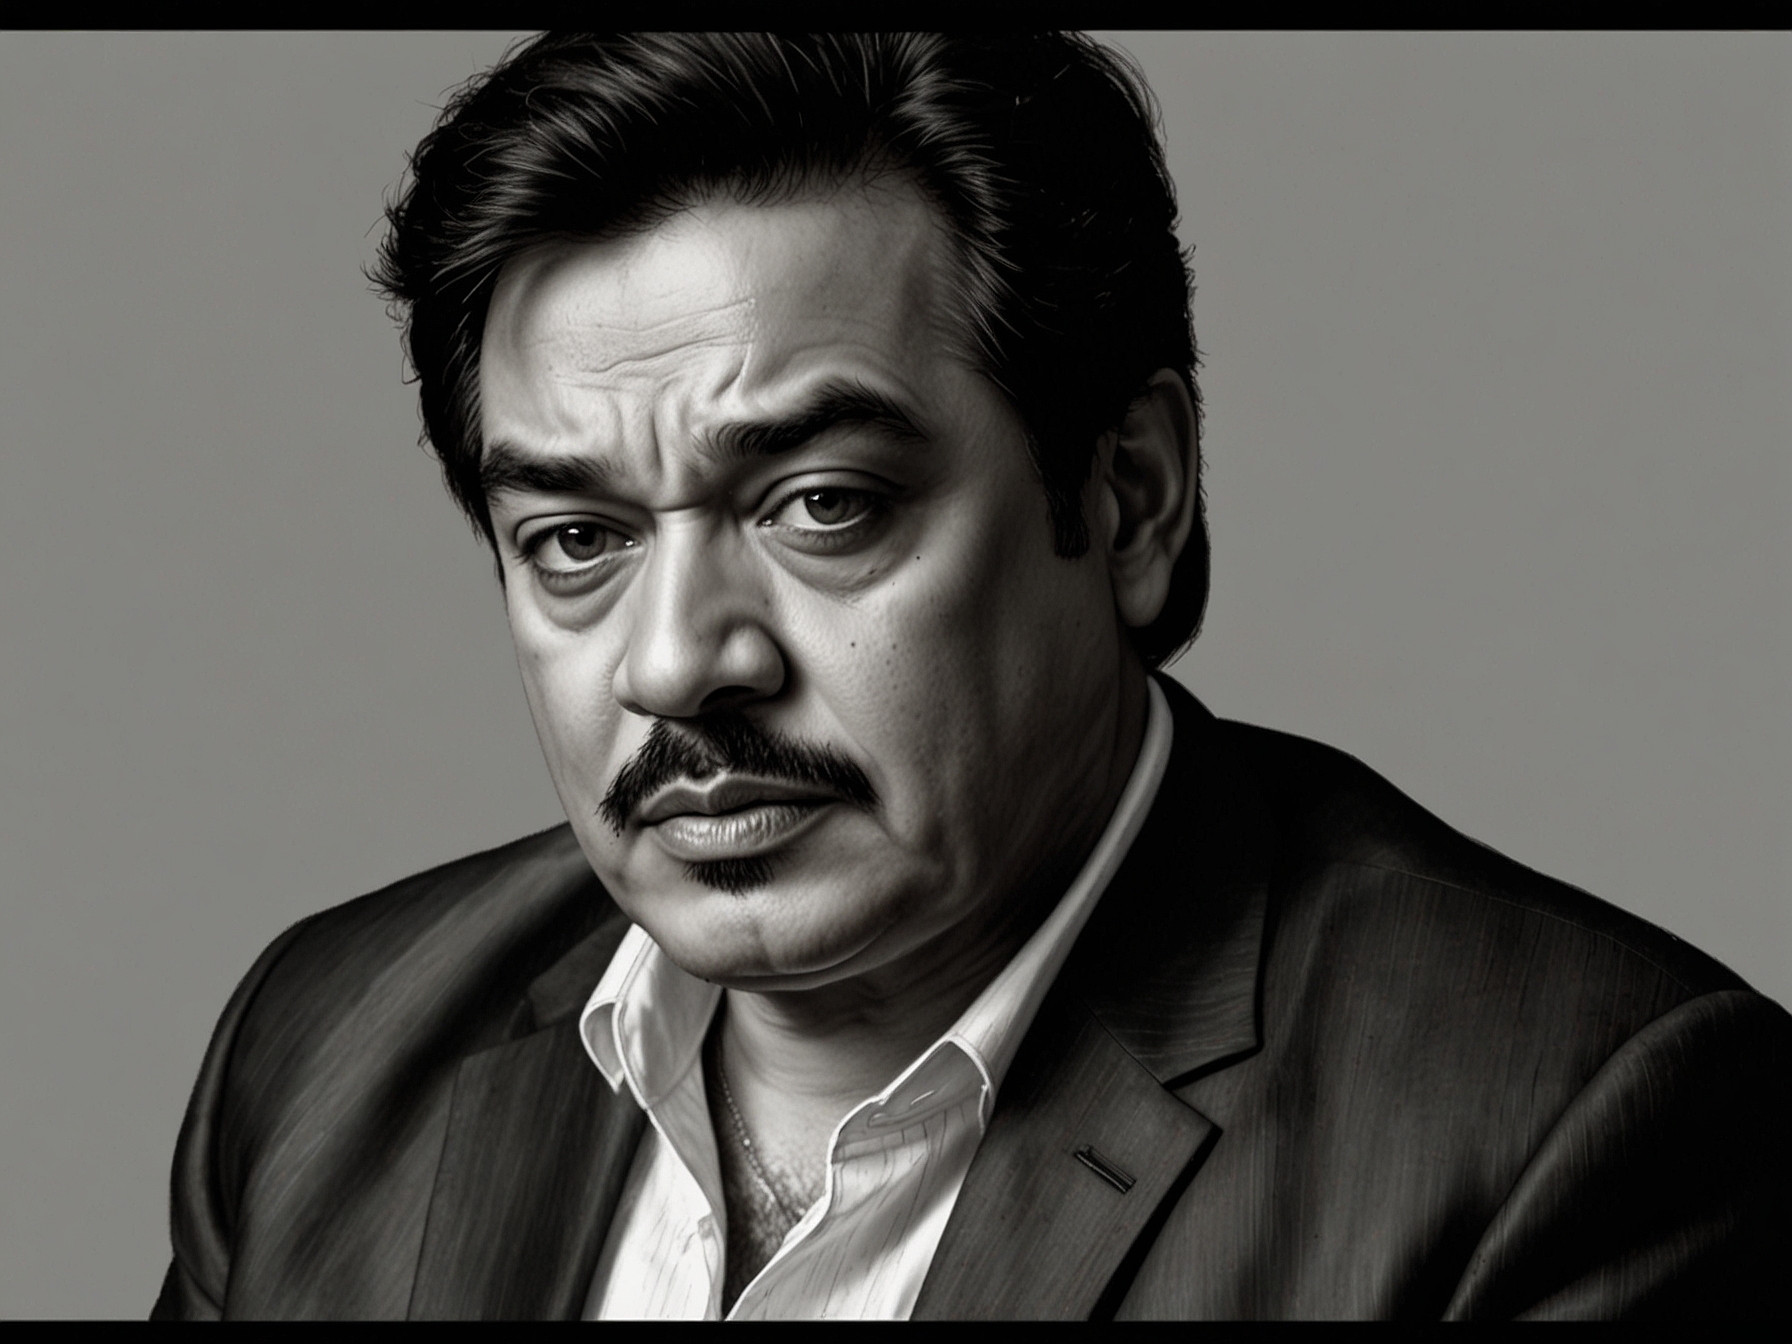 Shatrughan Sinha pictured looking stern and contemplative, embodying the emotional discontent surrounding his daughter Sonakshi Sinha's impending wedding with actor Zaheer Iqbal.